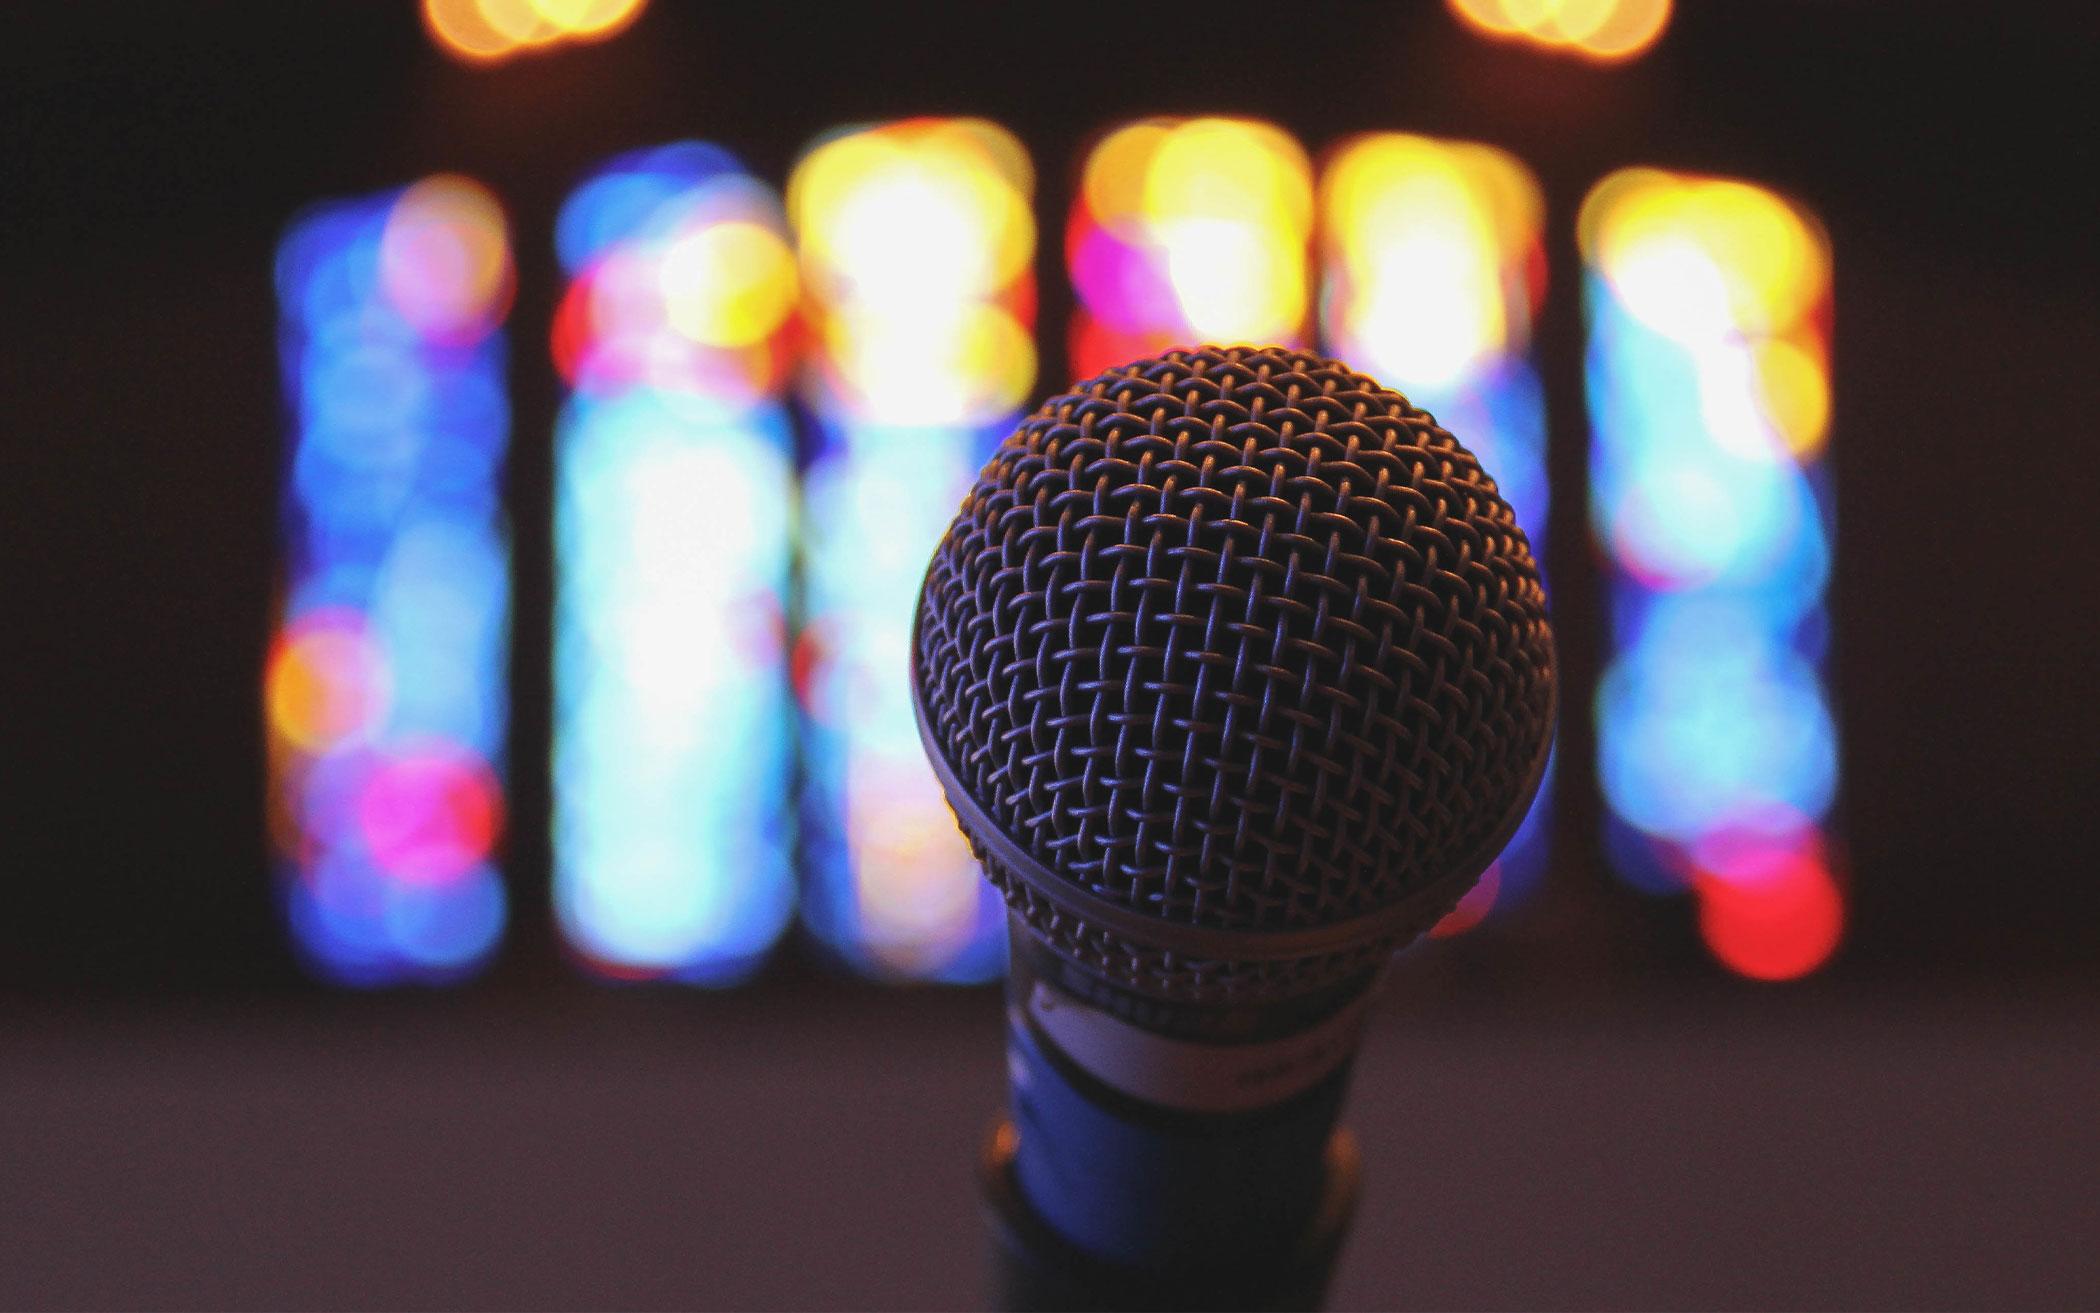 Microphone with stained glass in background.